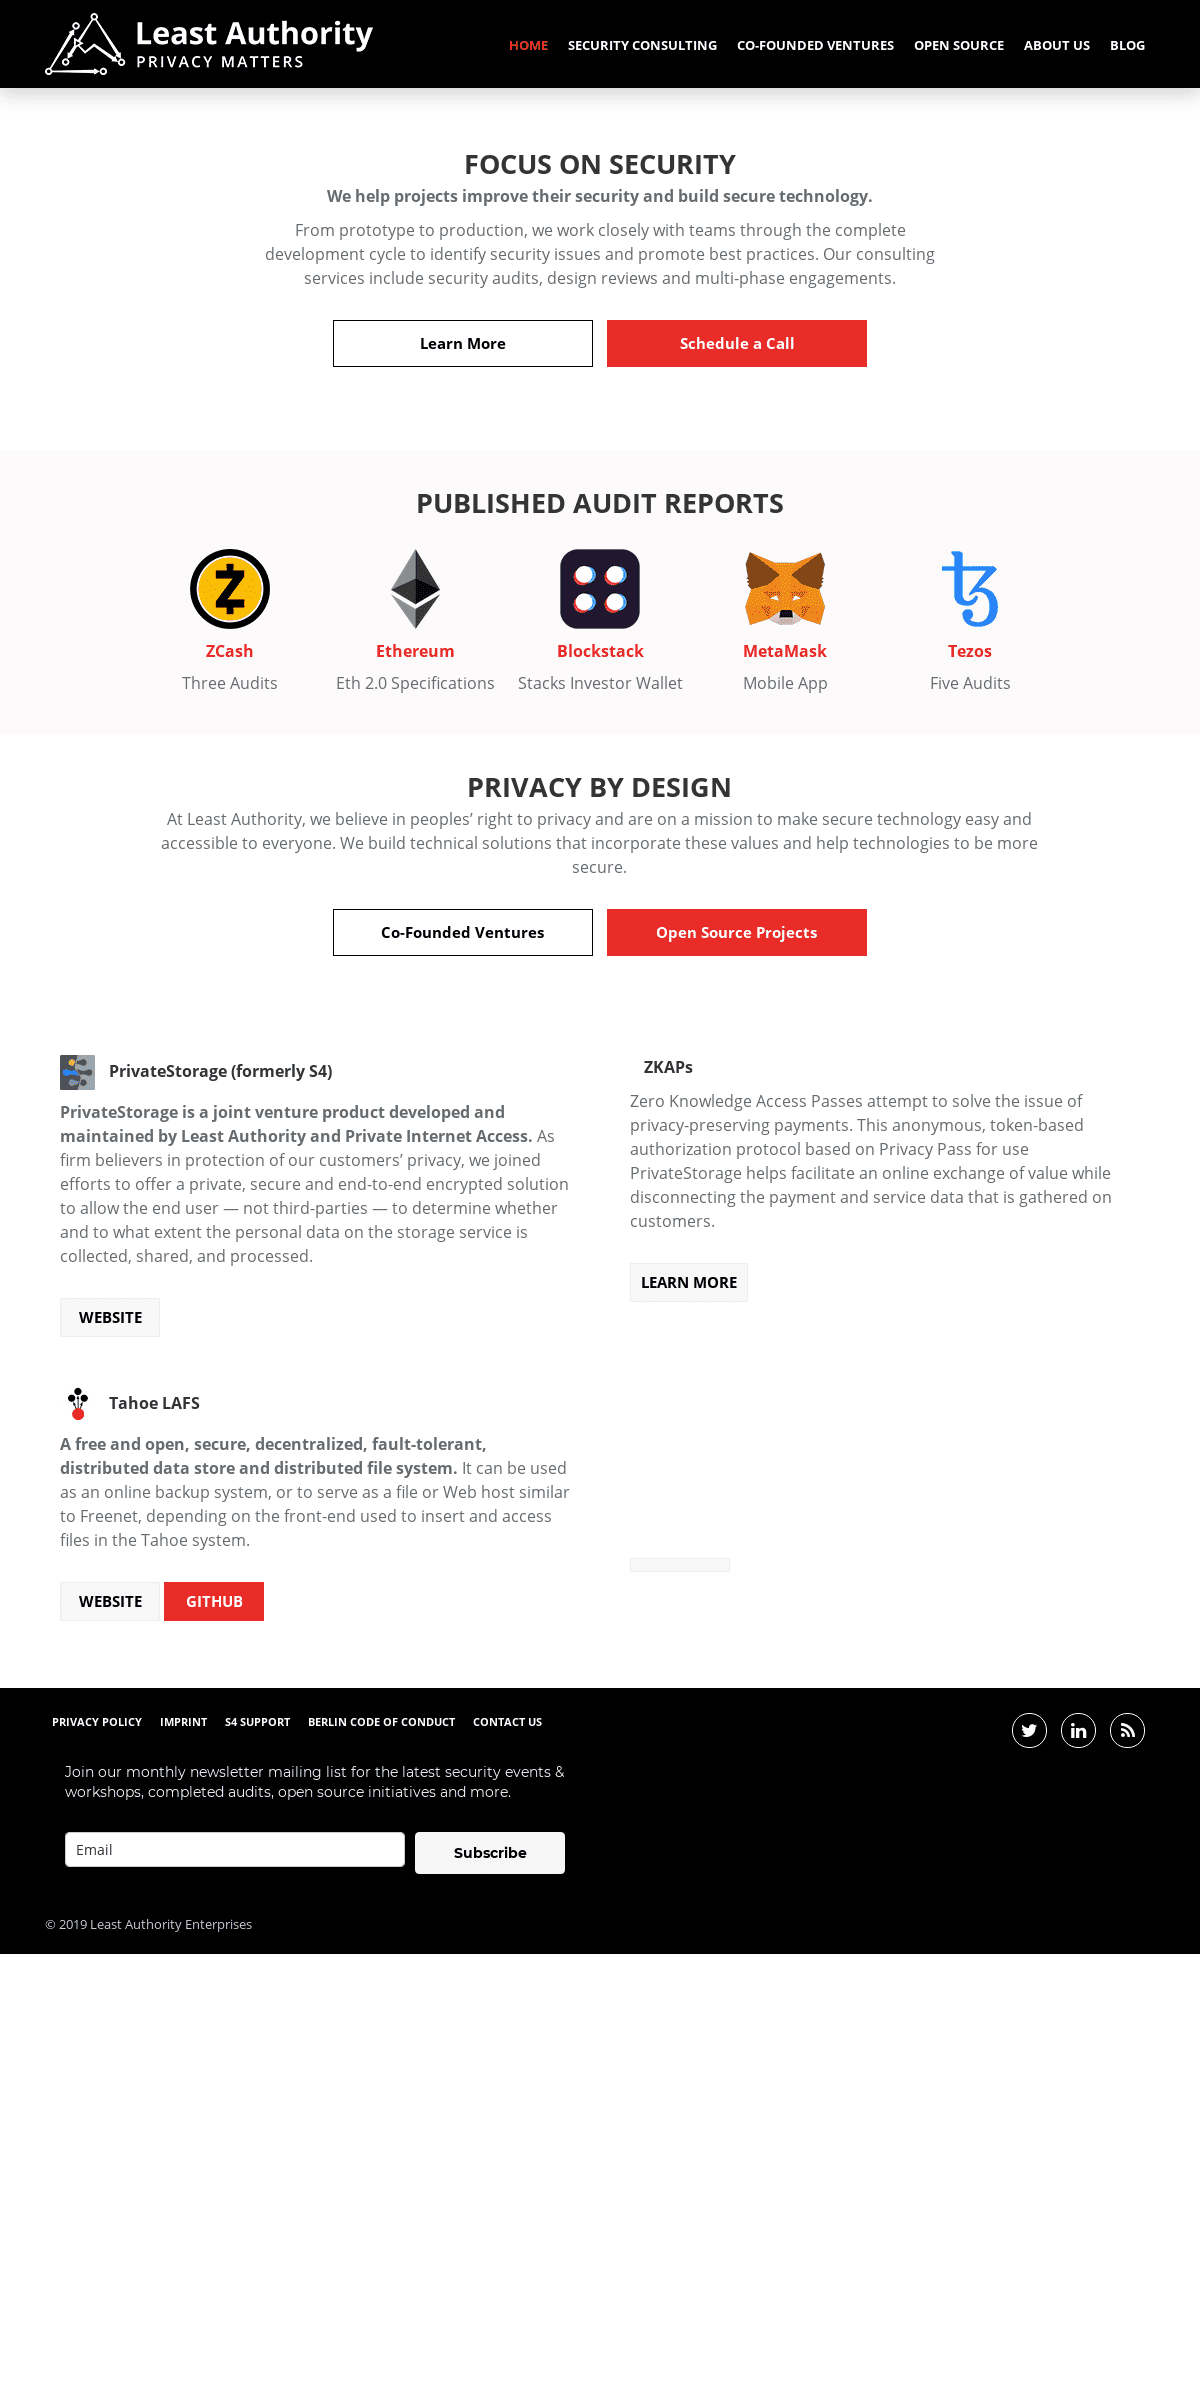 A complete backup of leastauthority.com